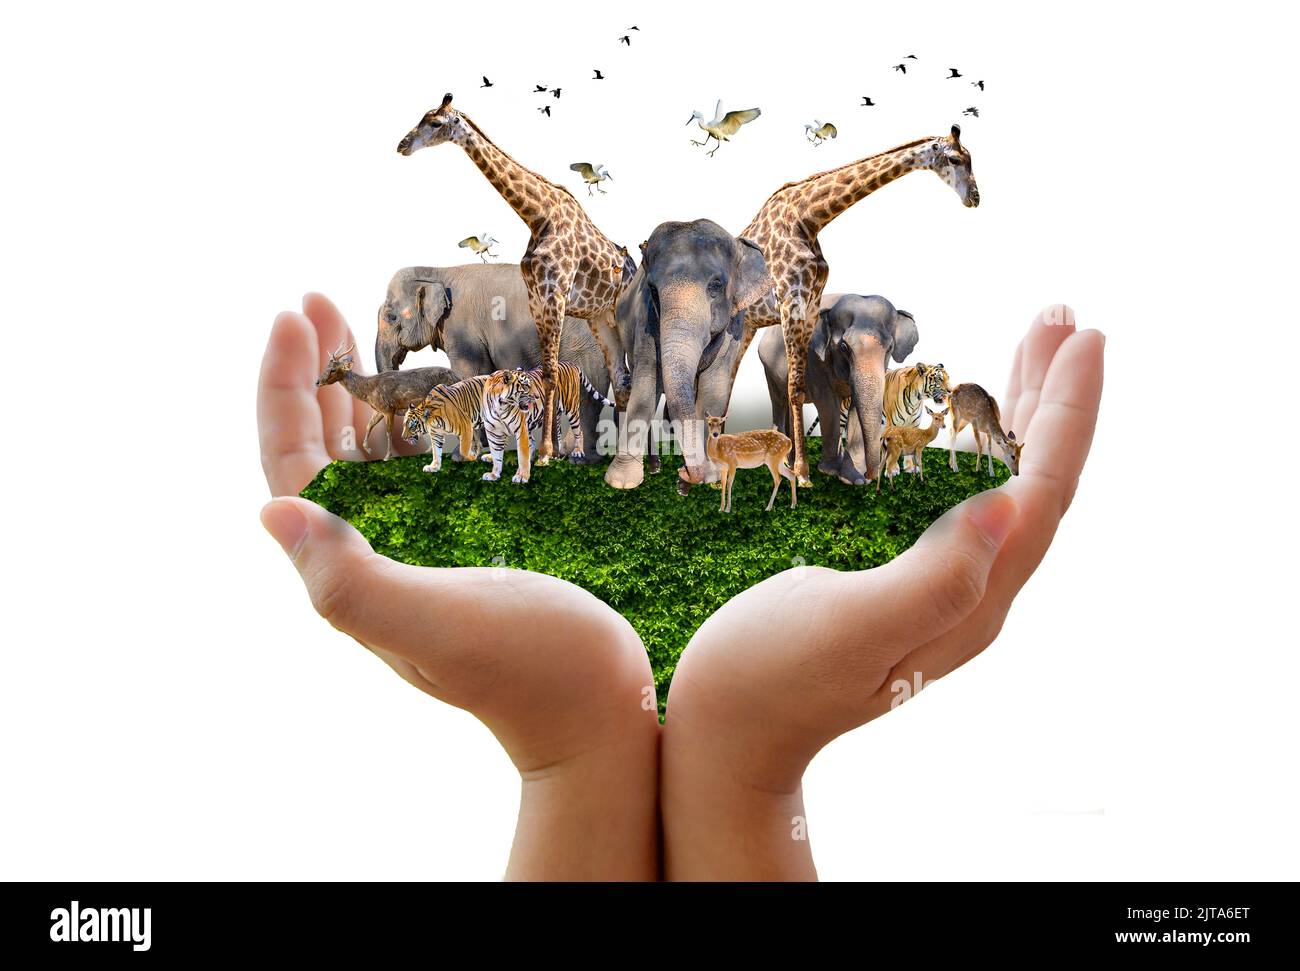 World Animal Day World Wildlife Day  Groups of wild beasts were gathered in the hands of people Stock Photo